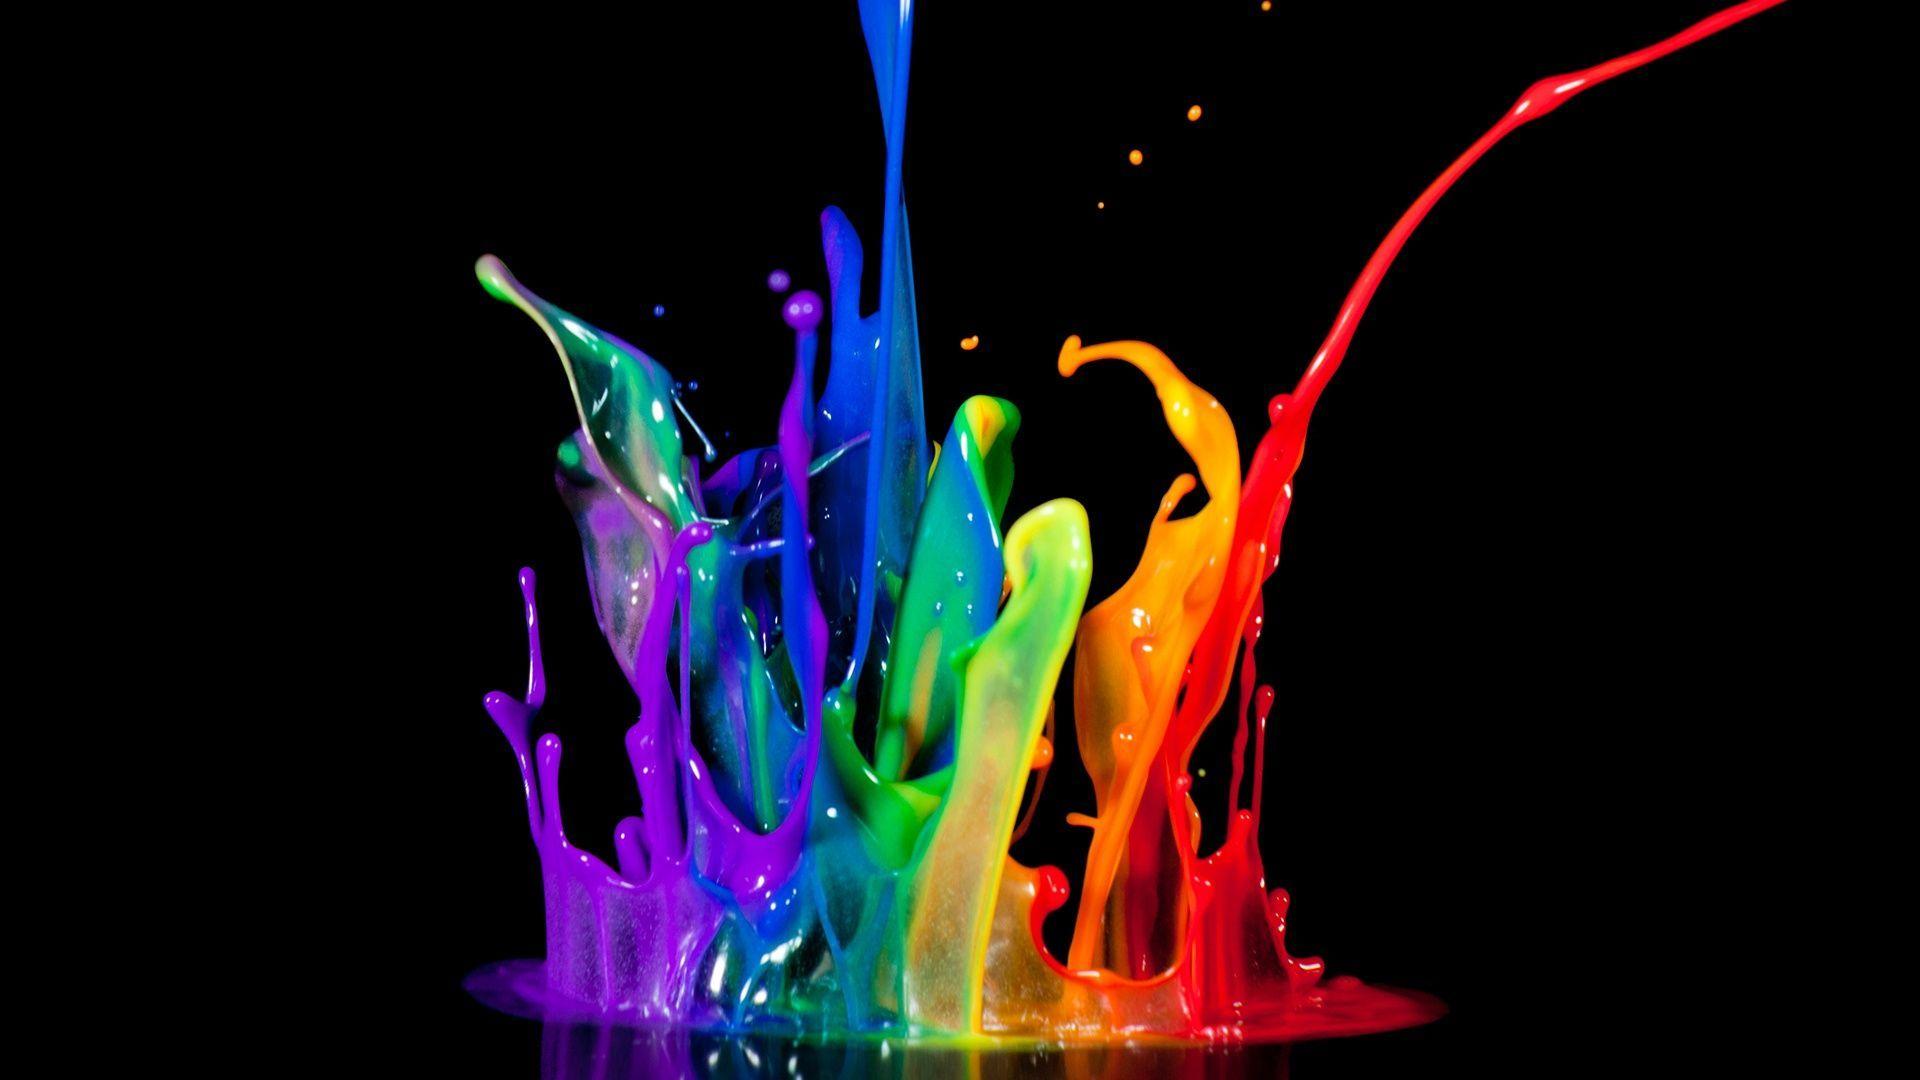 Colorful HD Wallpaperx1080. Painting wallpaper, Colorful wallpaper, Rainbow painting